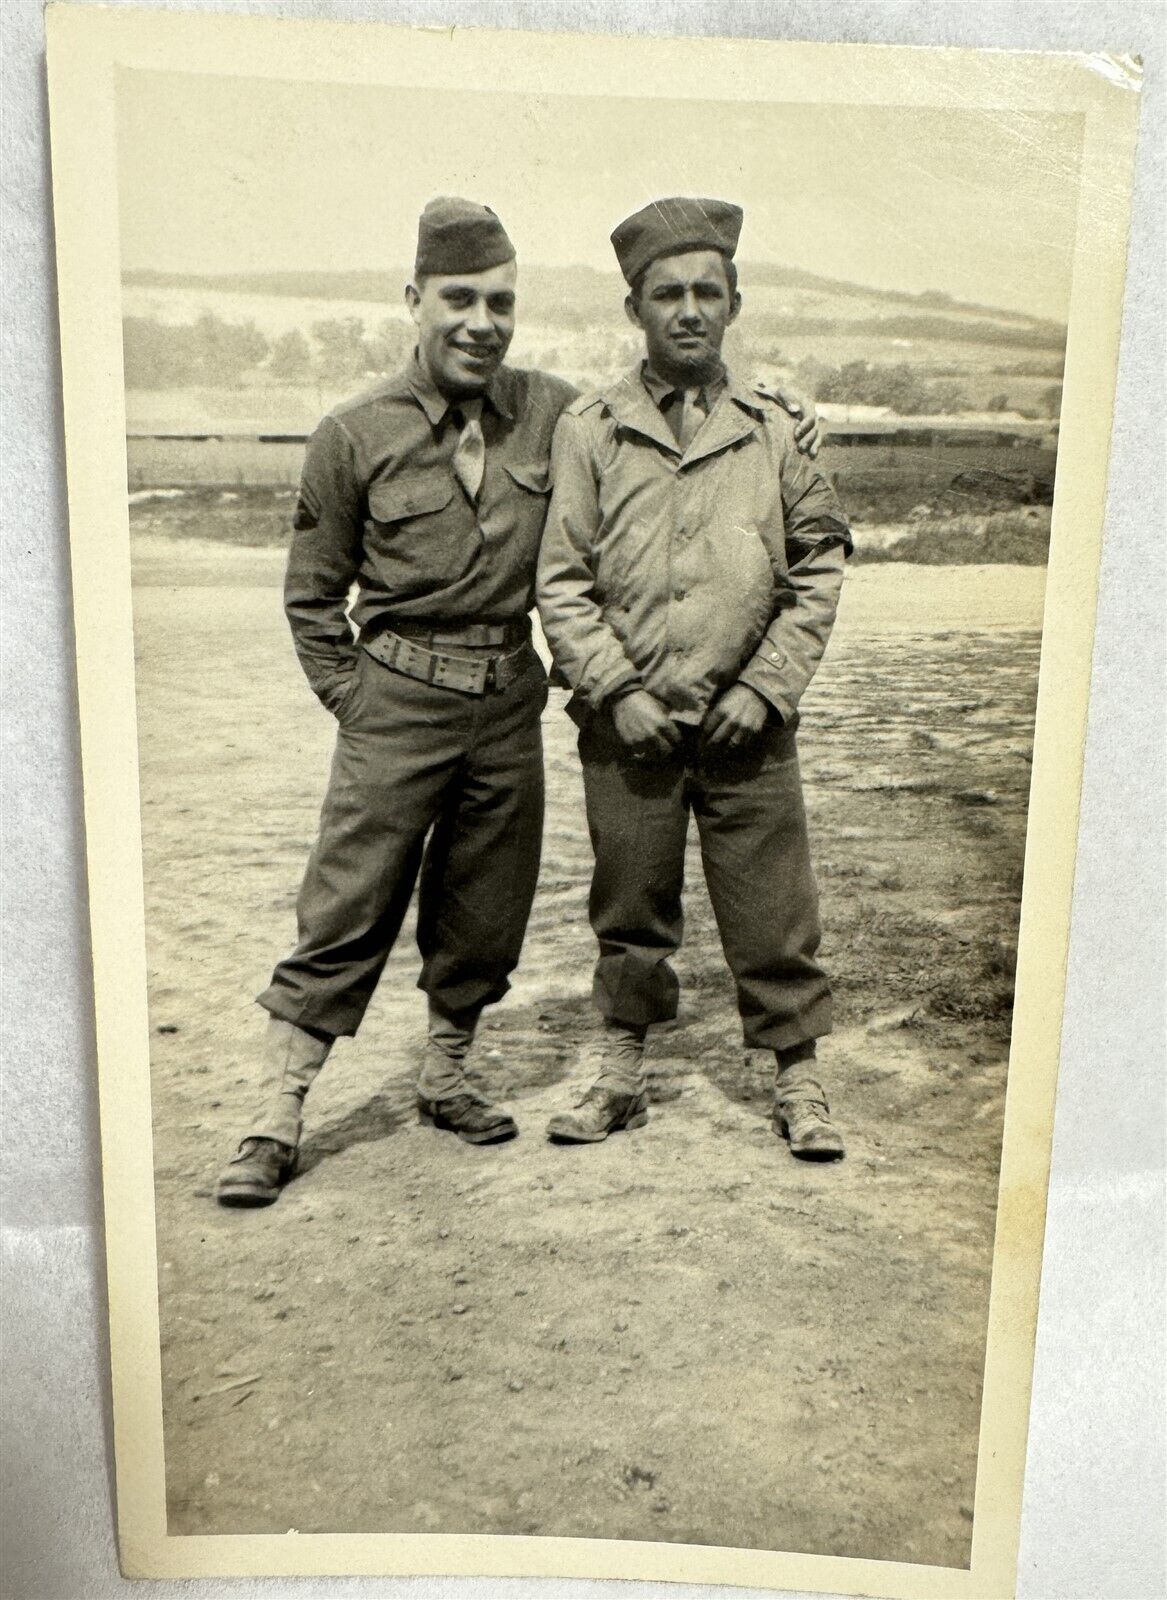 Vintage Snapshot Photograph Two WWII US Army Soldiers Corporal